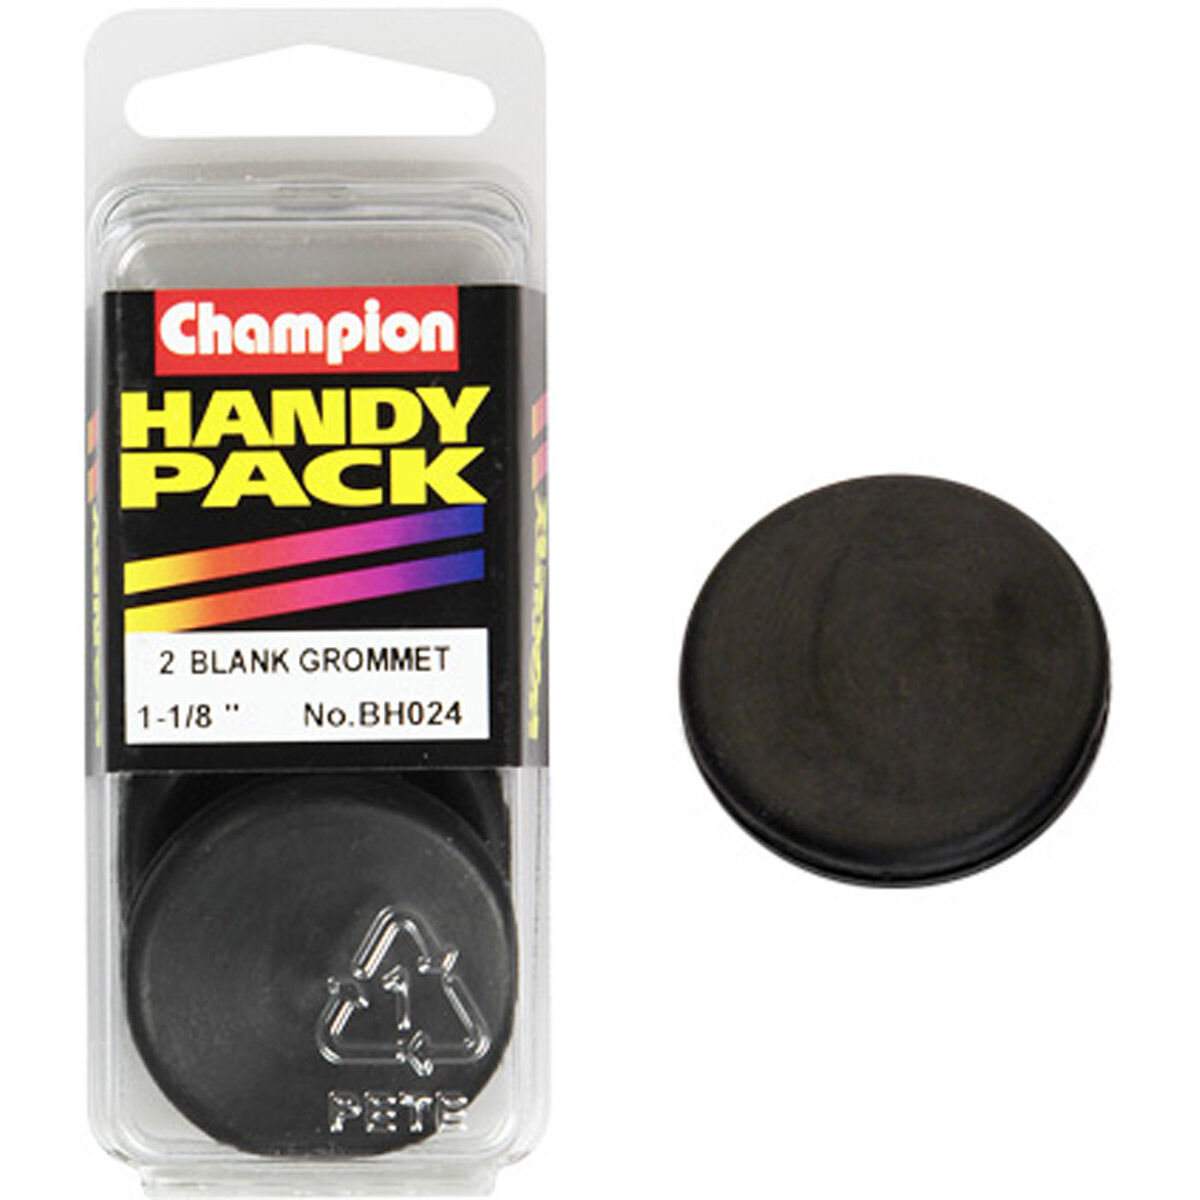 Champion Handy Pack Blanking Grommets BH024 1-1/8